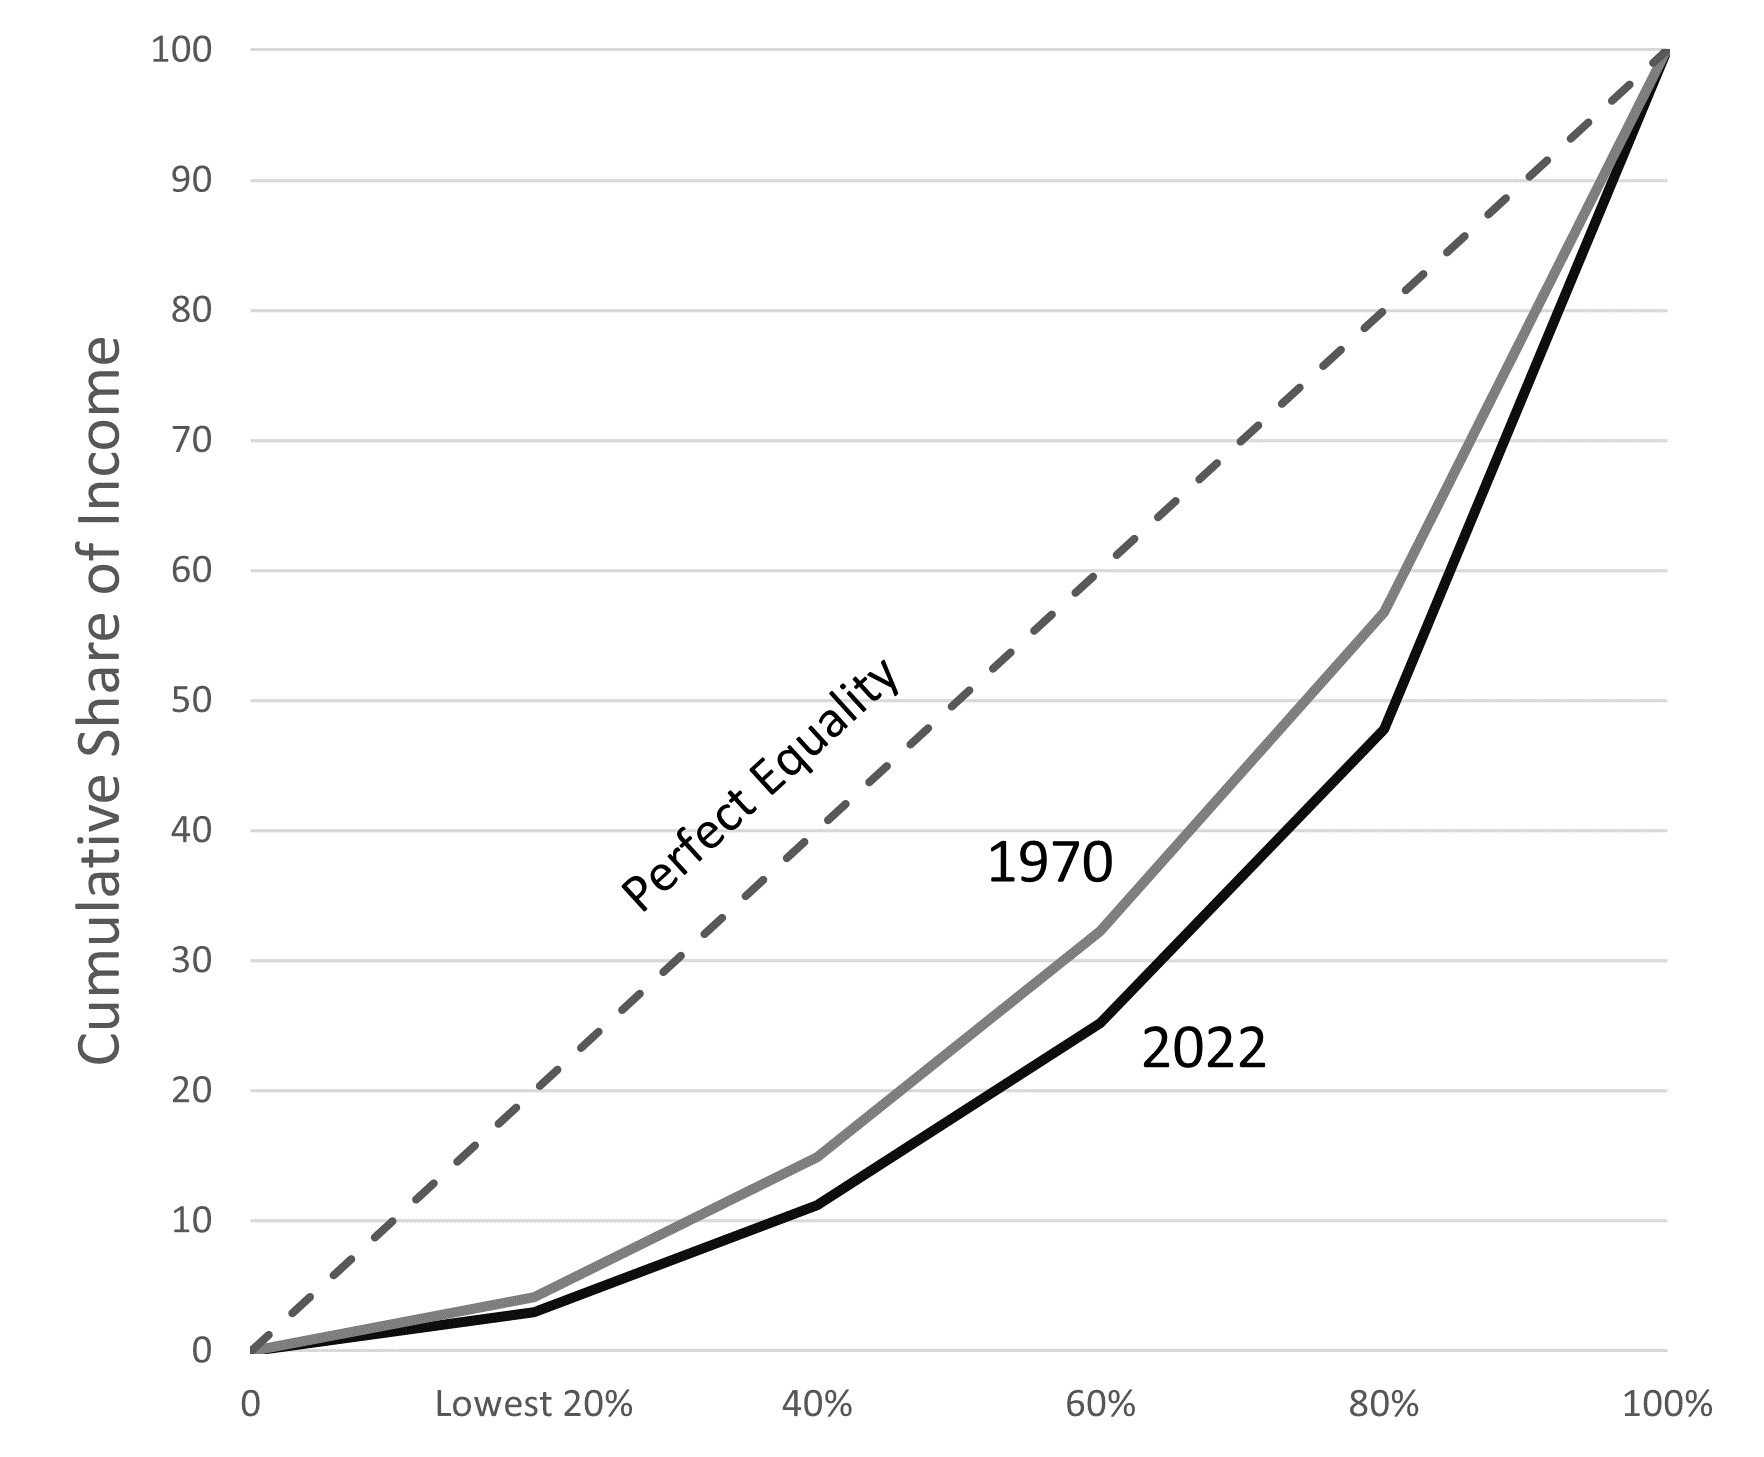 Lorenz curves for 1970 and 2022